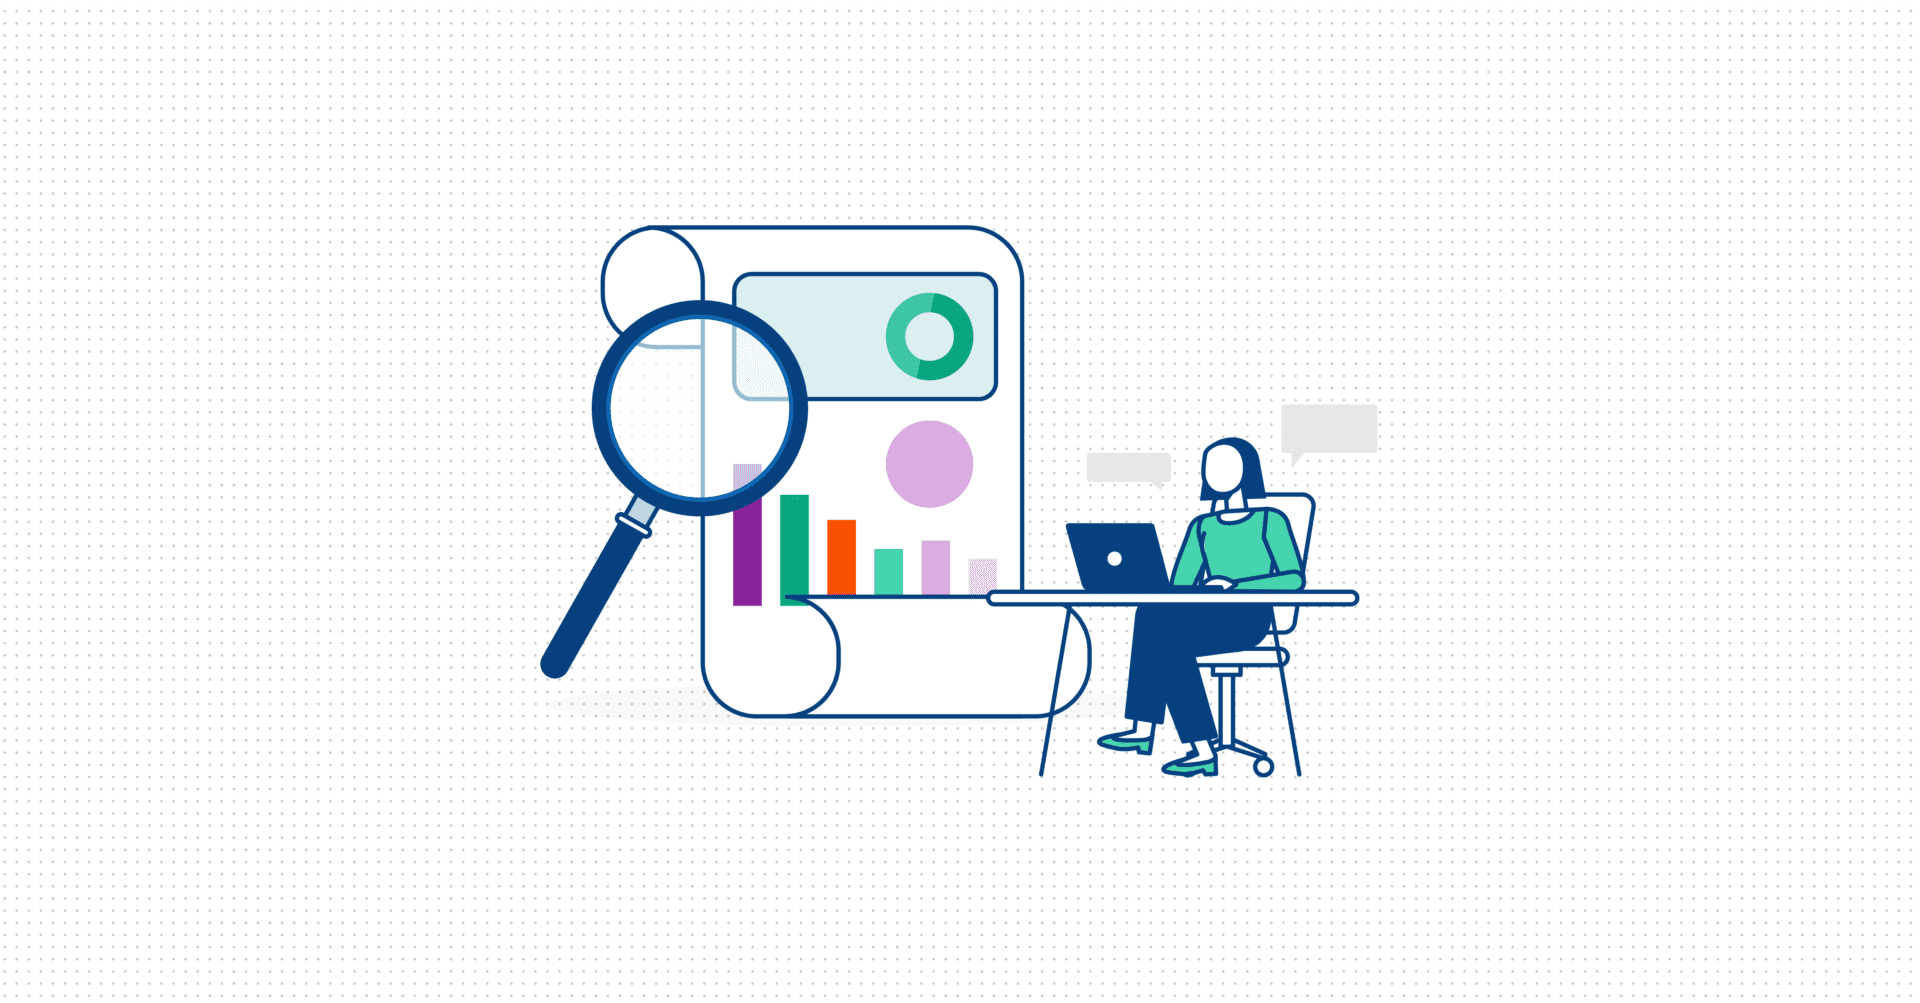 A vector graphic of a magnifying glass, a chart and a person using a laptop